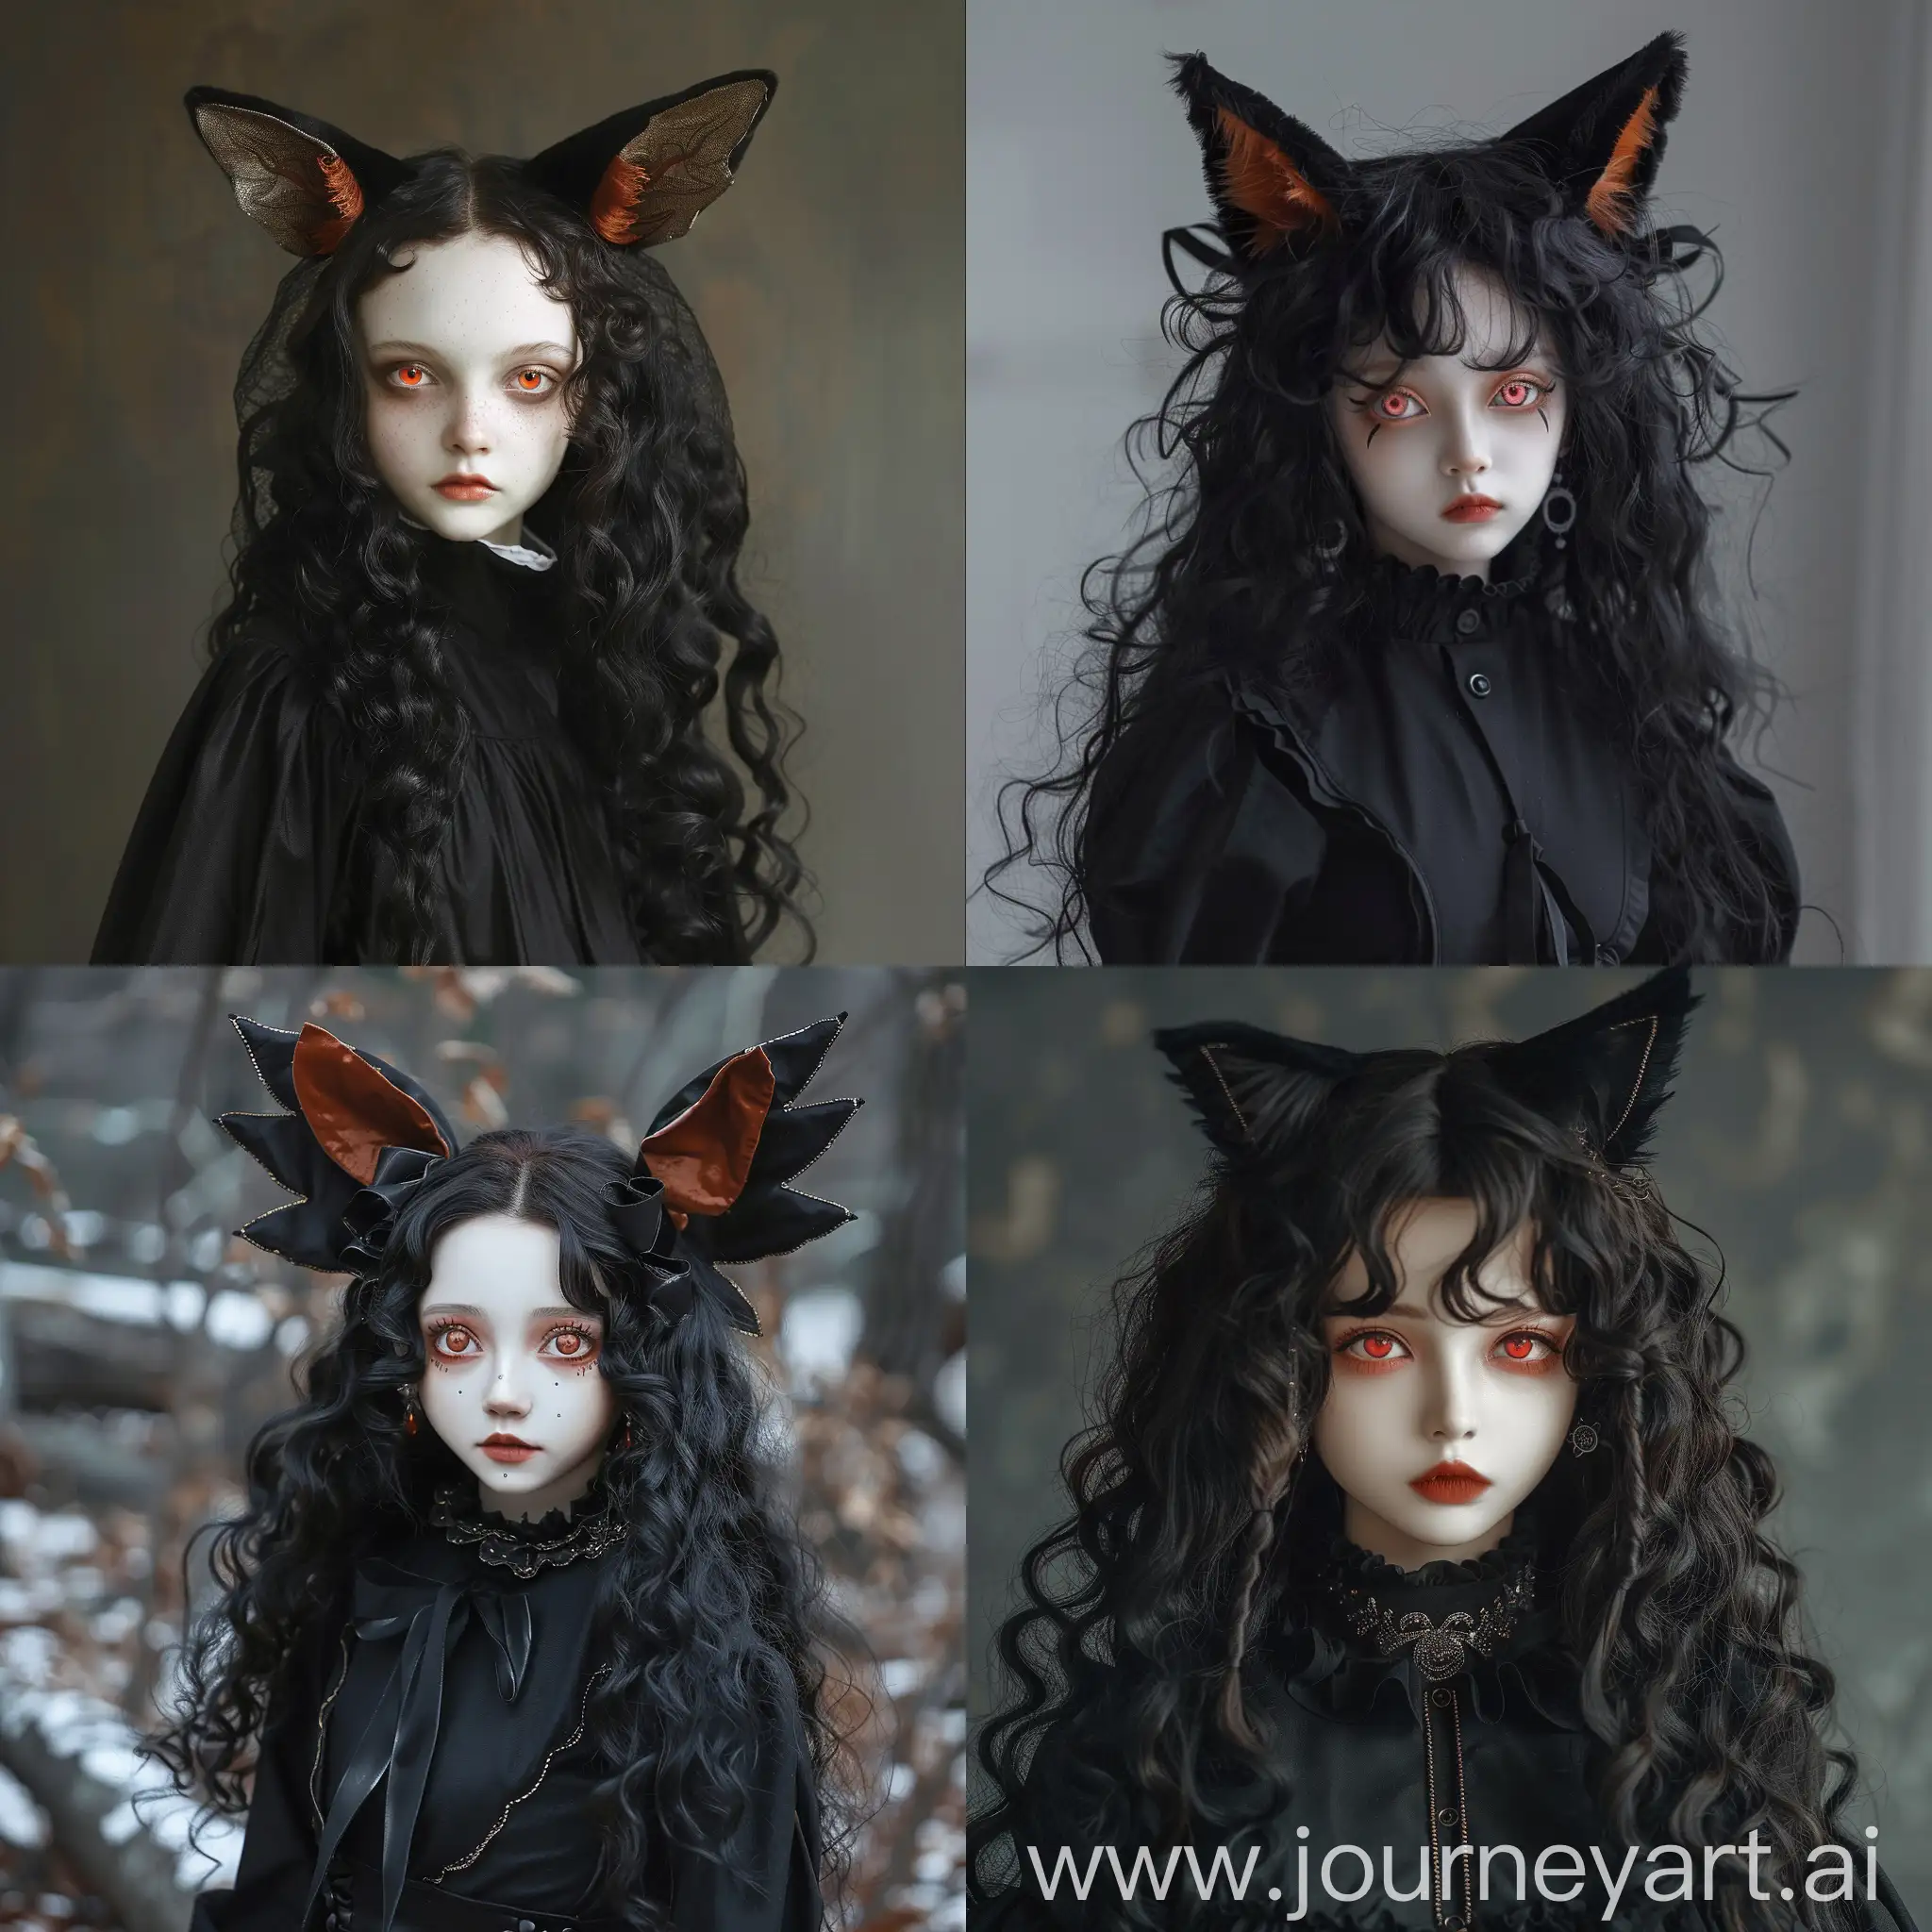 Elegant-FoxLike-Girl-with-Red-Eyes-and-Curly-Black-Hair-in-Black-Costume